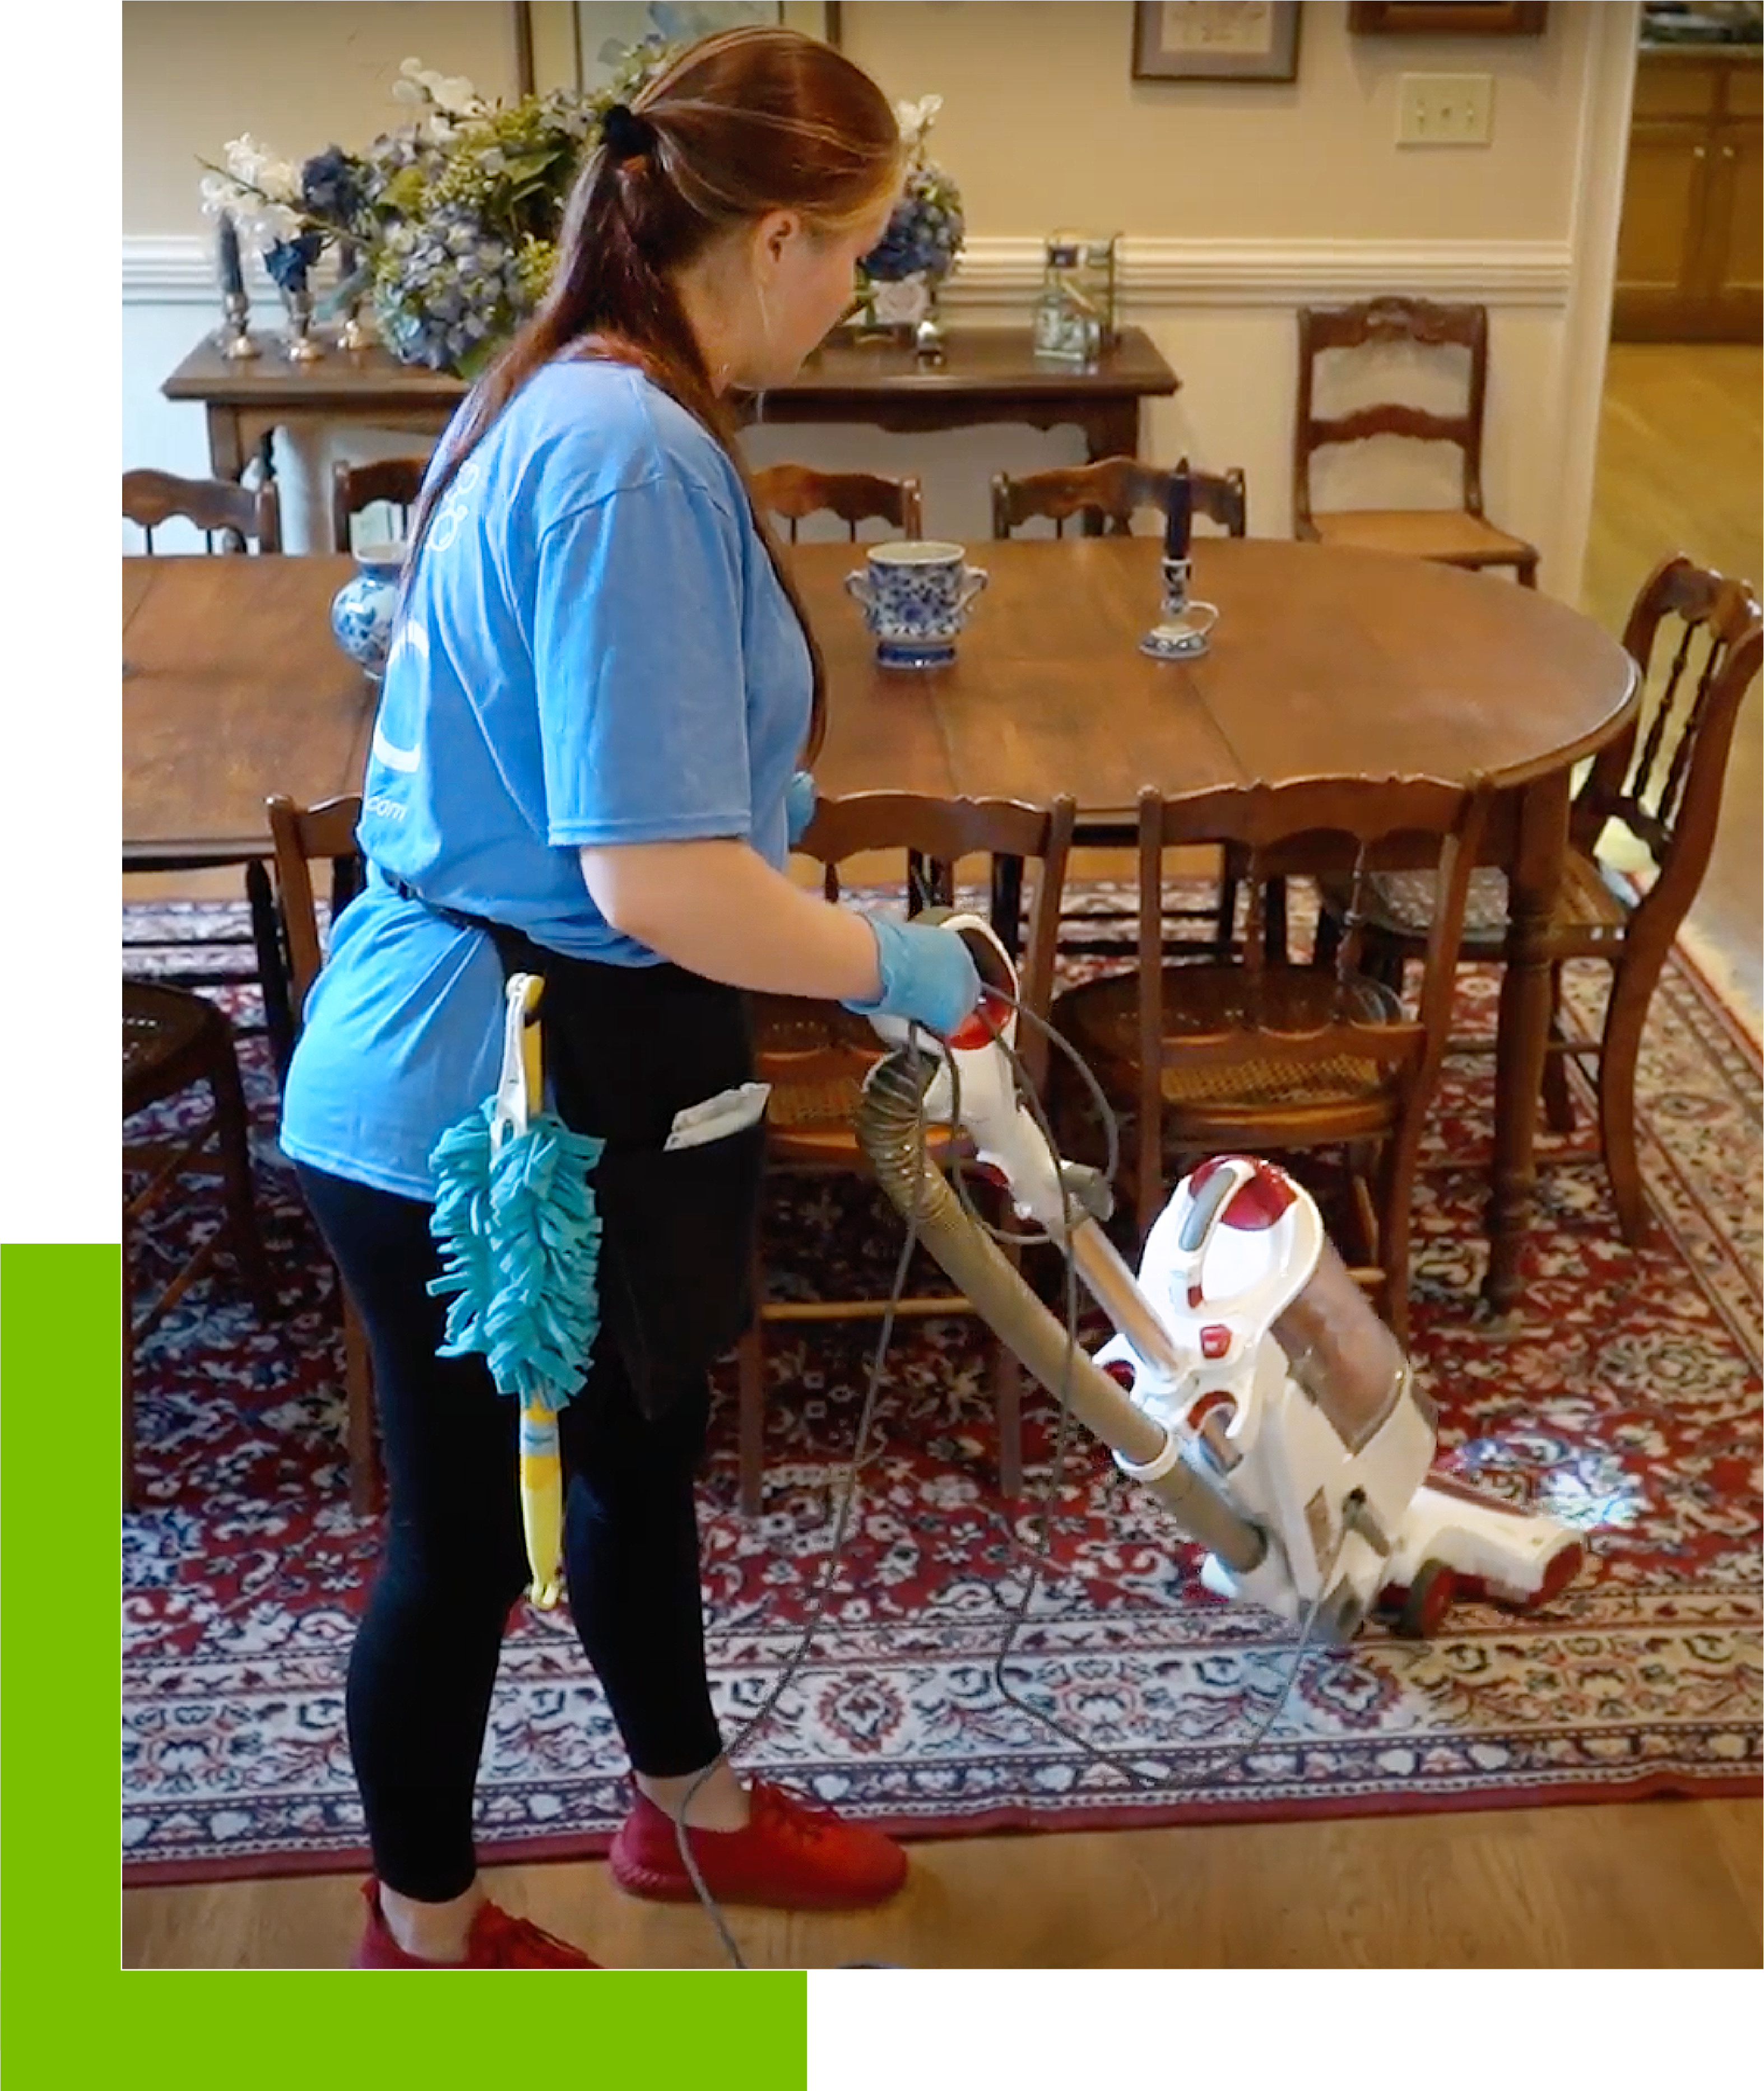 Looking for house cleaning services near me in Covington, GA?